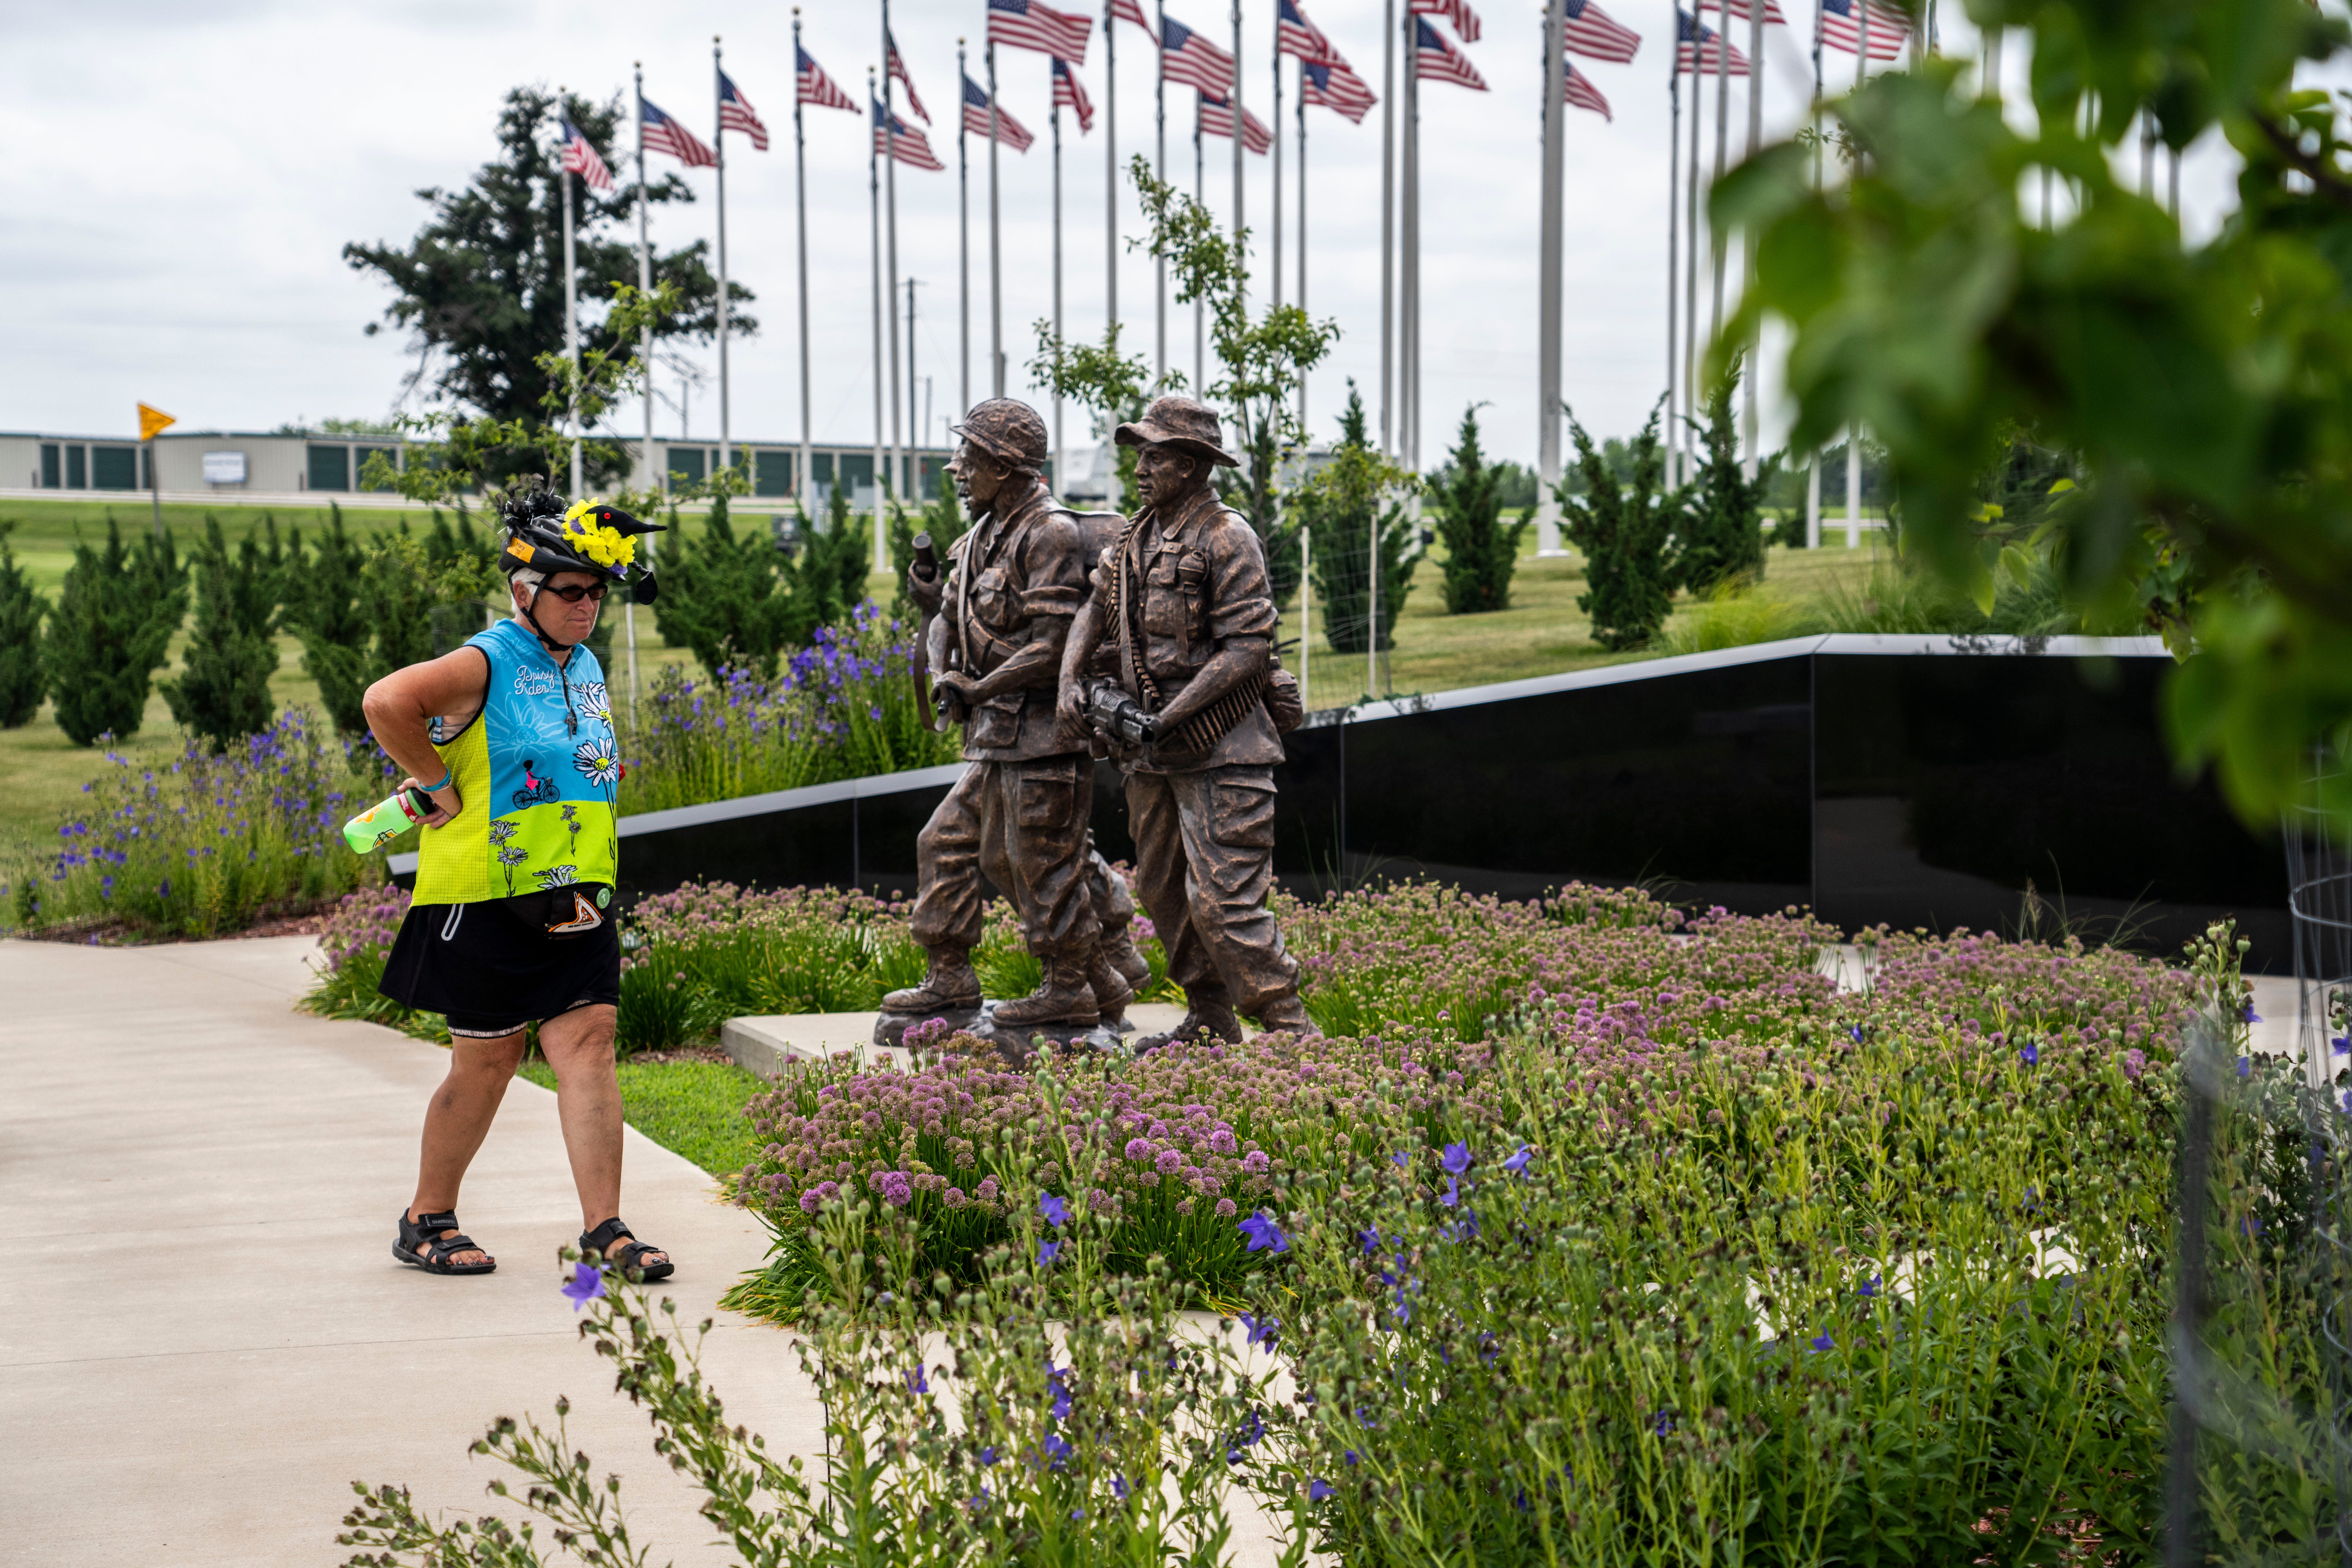 'Somebody cared about them': Albia RAGBRAI stop features monument for veterans, soldiers